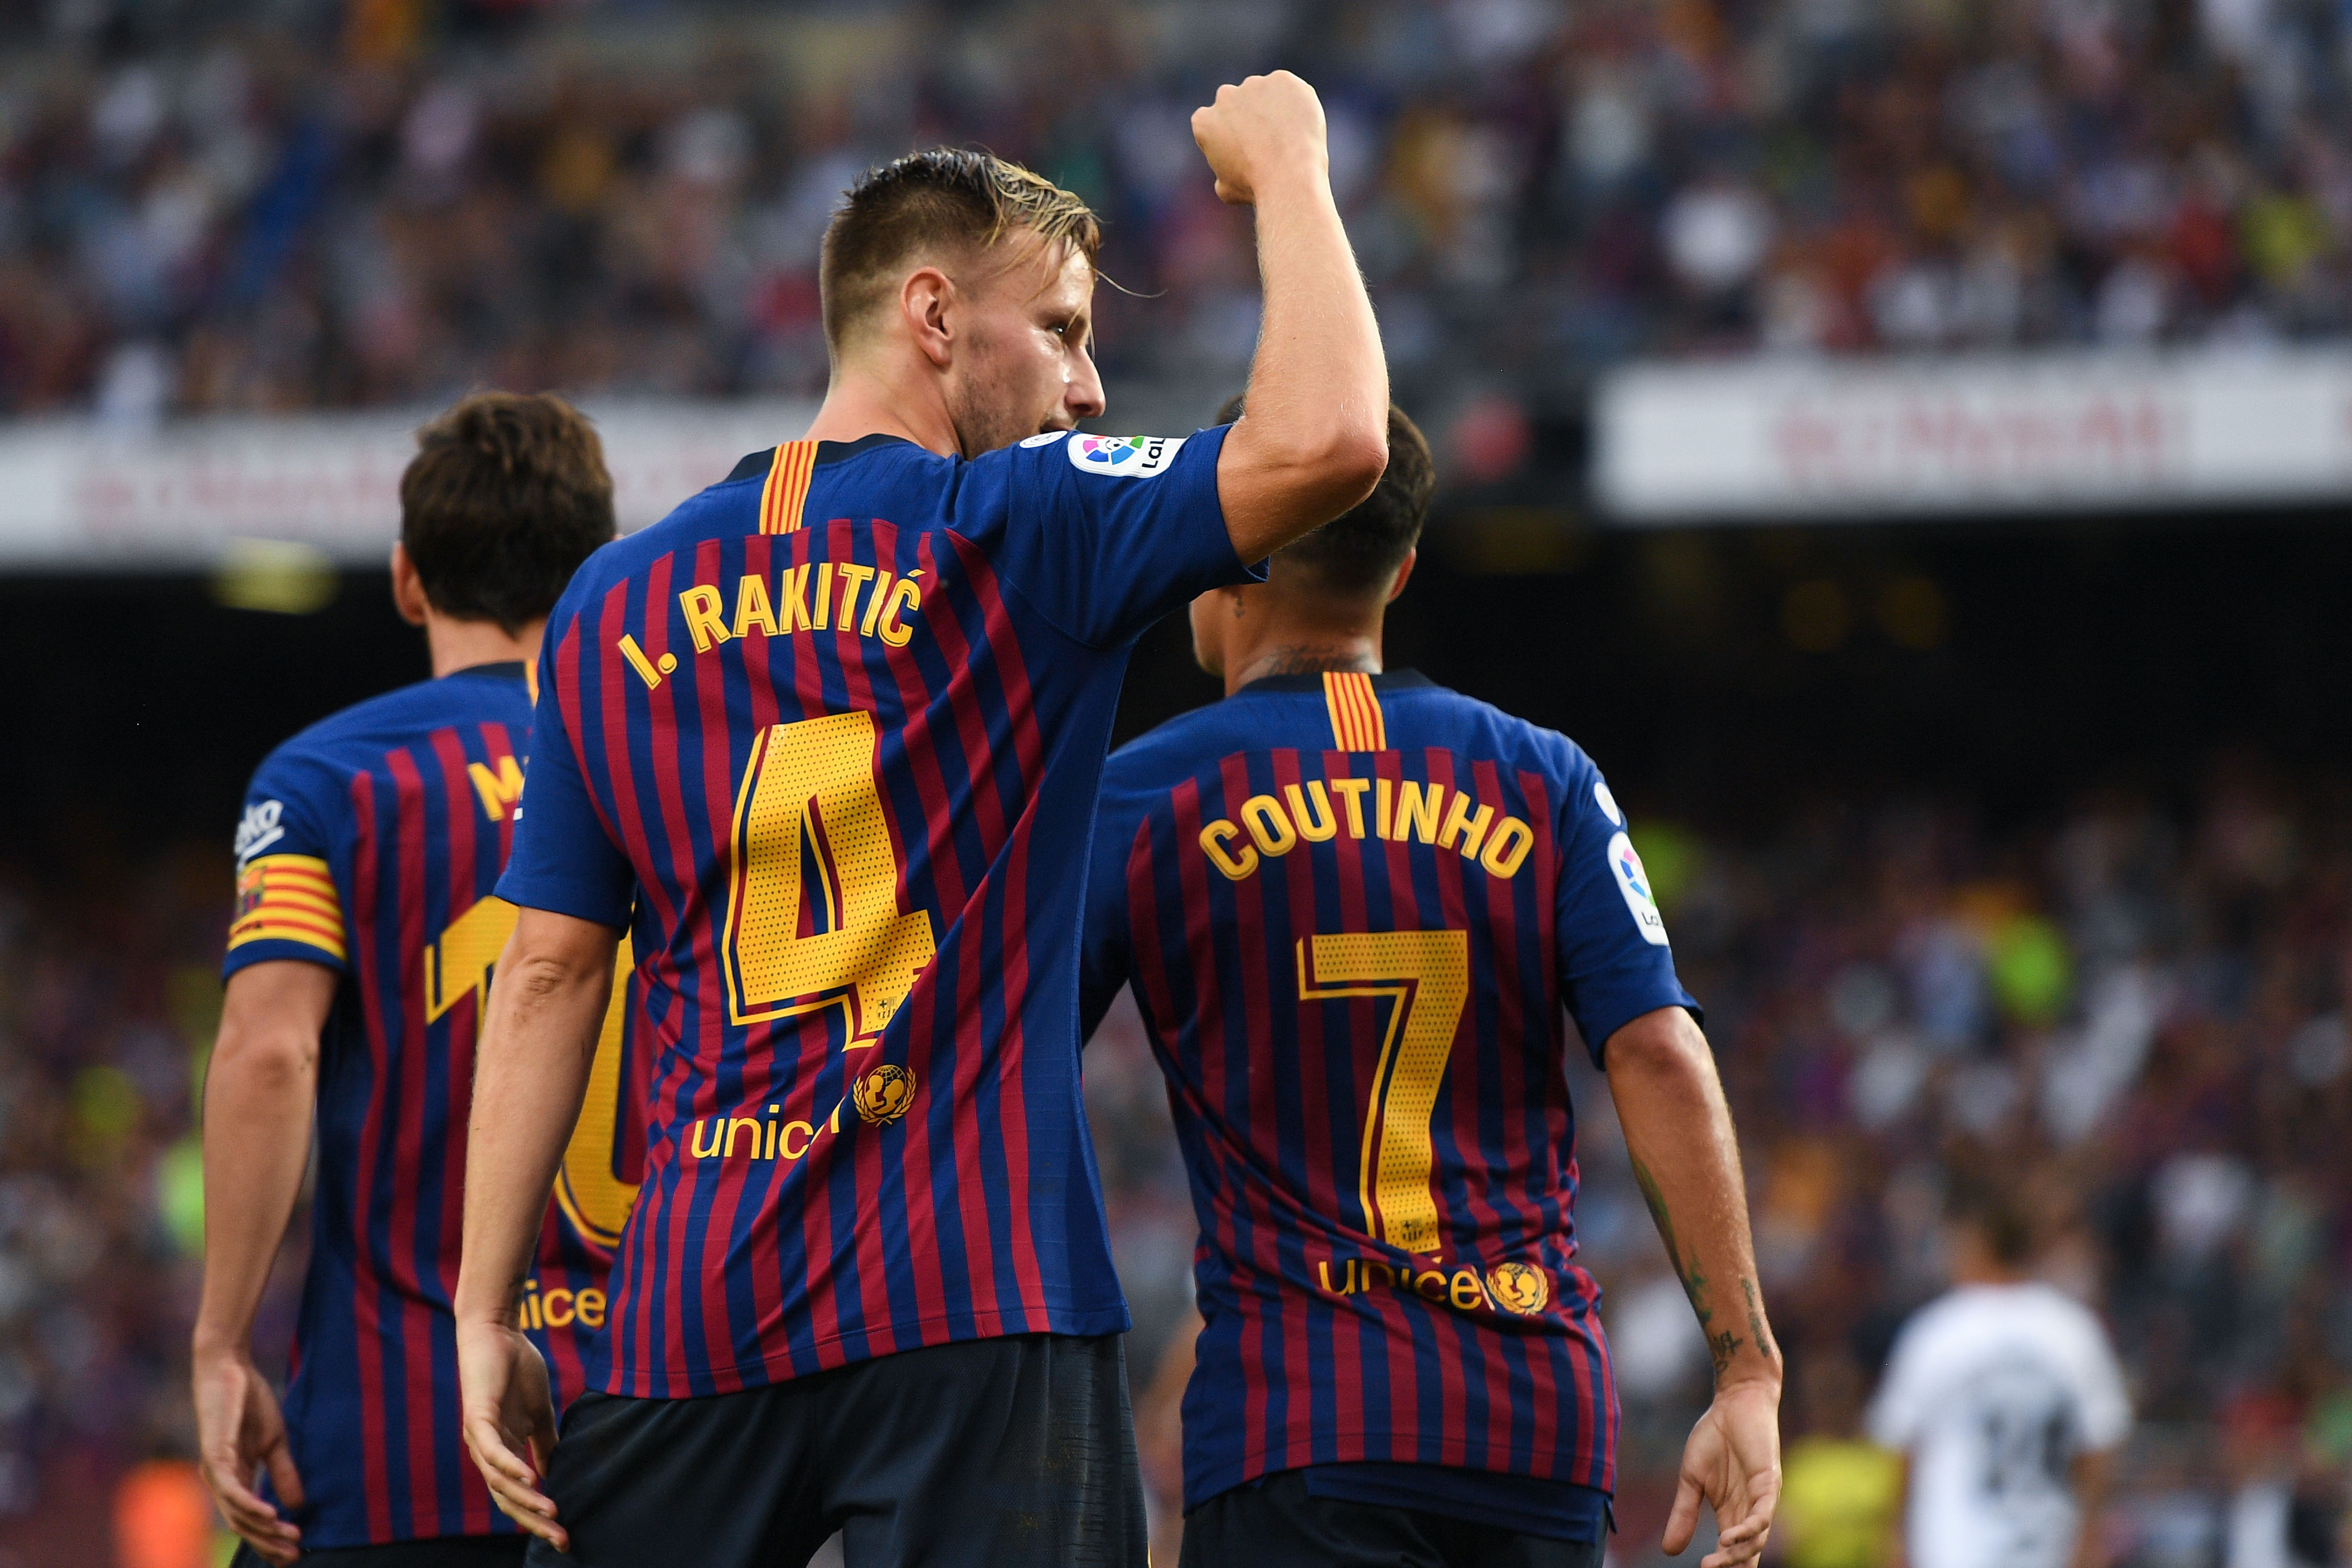 BARCELONA, SPAIN - SEPTEMBER 02:  Ivan Rakitic of FC Barcelona celebrates after scoring his team's fifth goal during the La Liga match between FC Barcelona and SD Huesca at Camp Nou on September 2, 2018 in Barcelona, Spain.  (Photo by David Ramos/Getty Images)